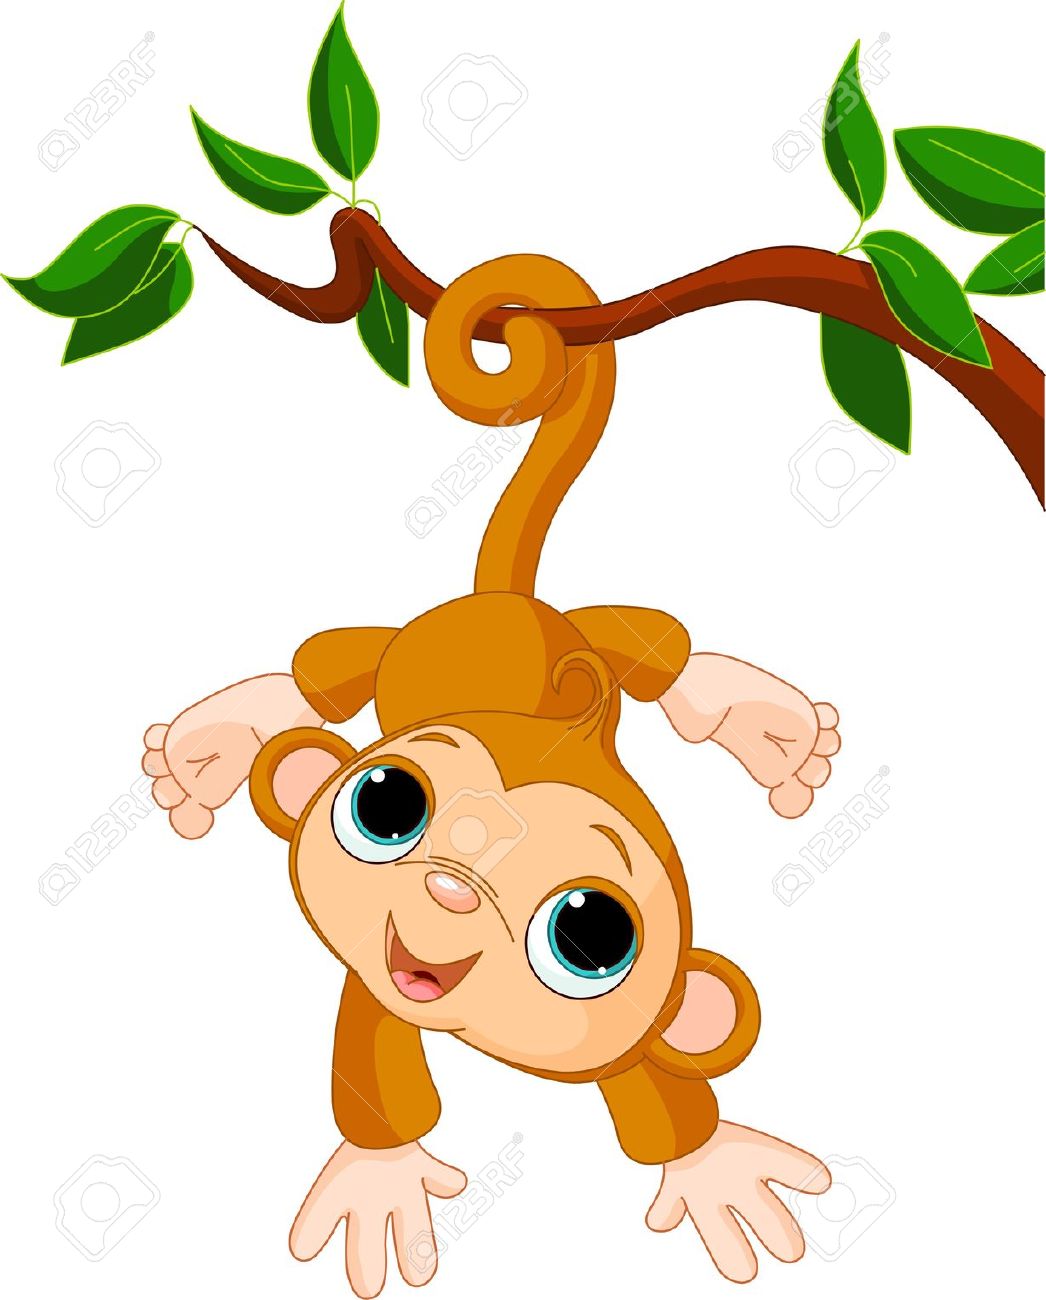 Cute monkey stock vector illustration and royalty free cute monkey